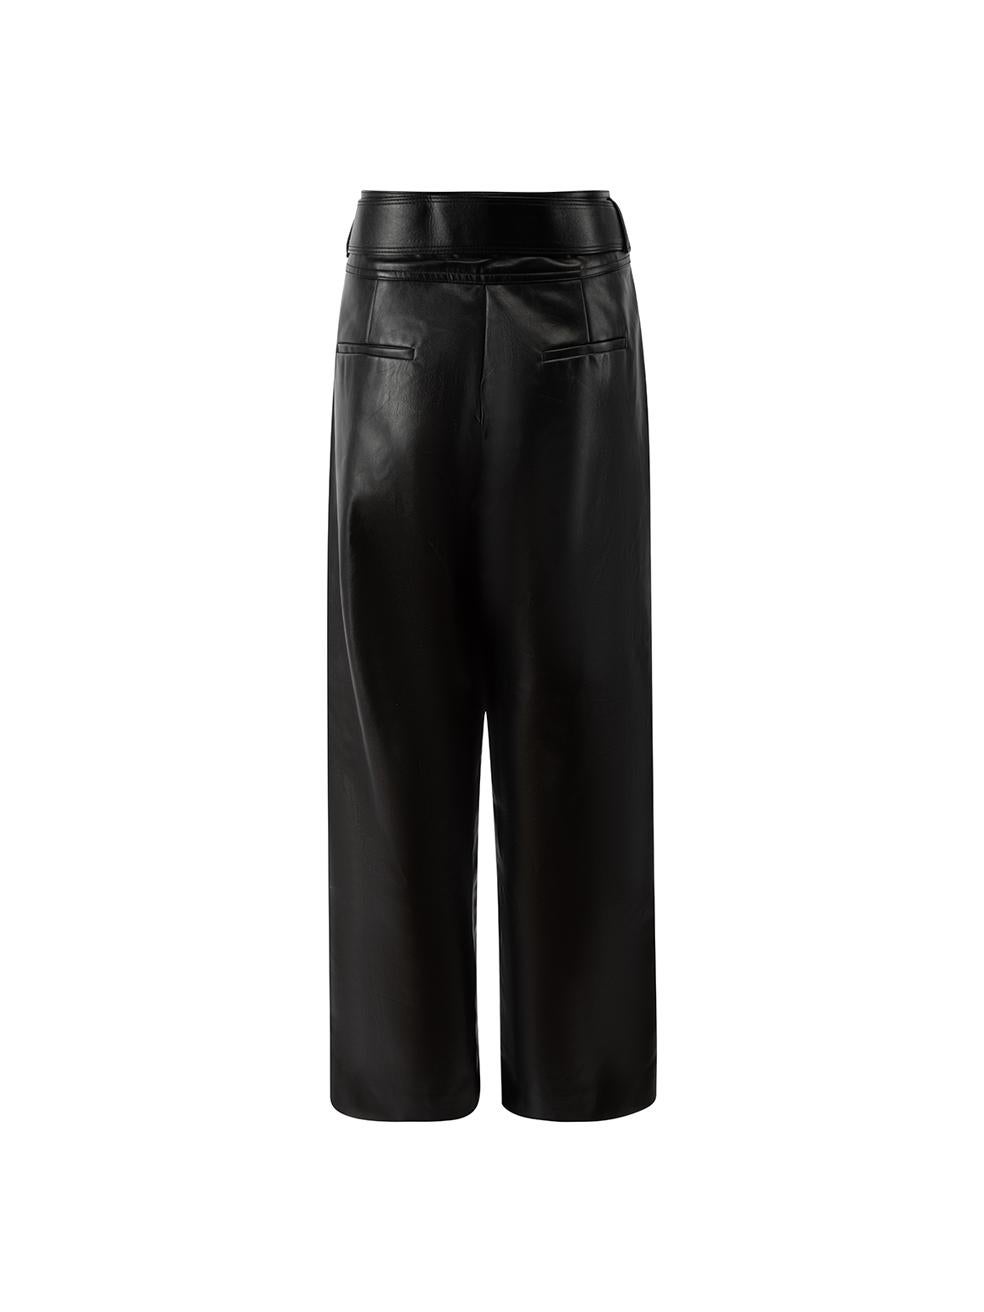 Black Faux Leather Belted Trousers Size L In New Condition For Sale In London, GB